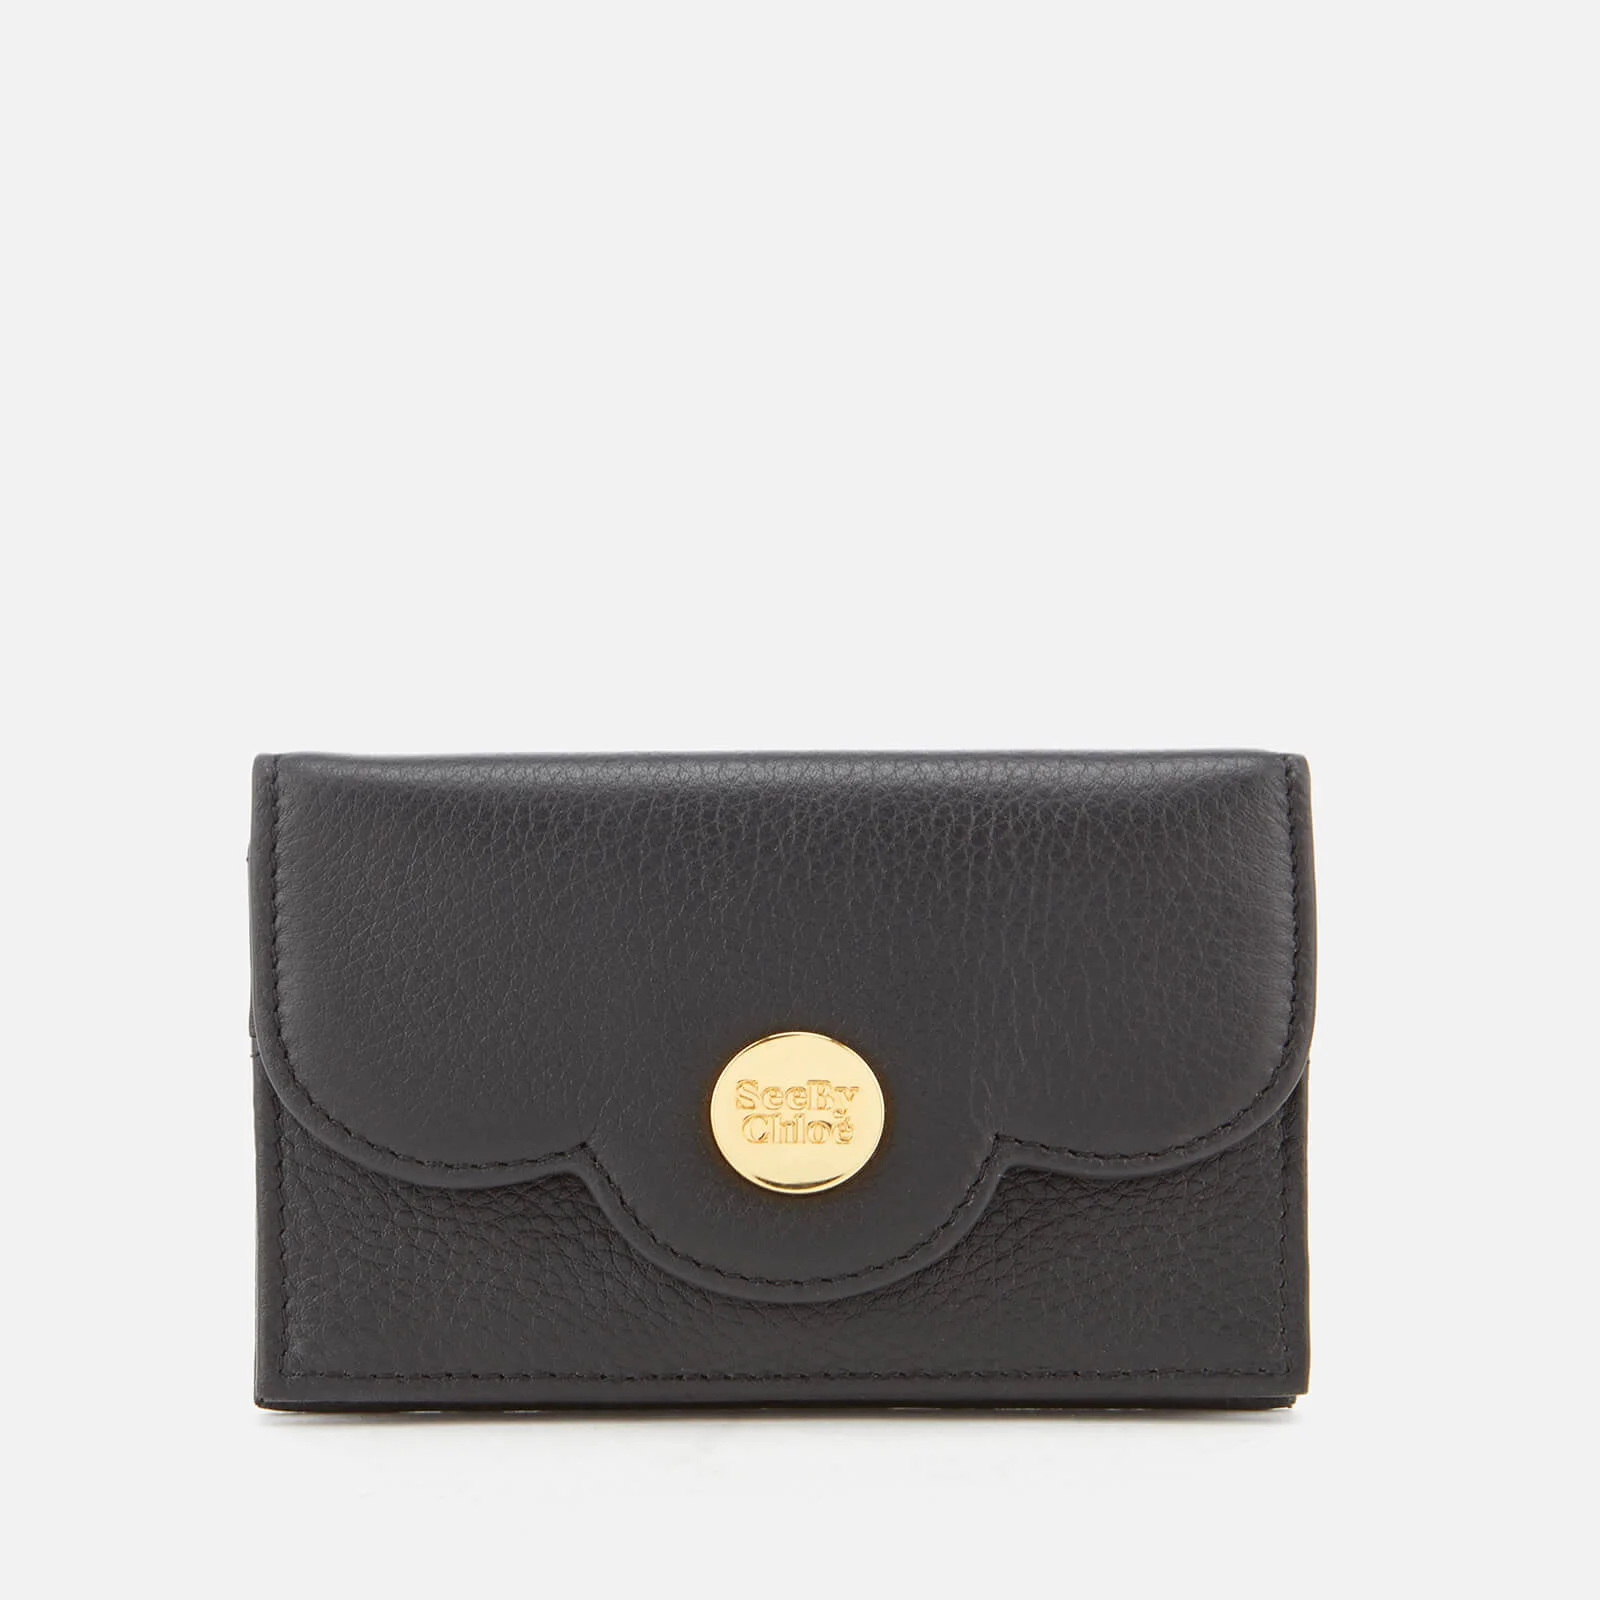 See By Chloé Women's Card Holder - Black Image 1